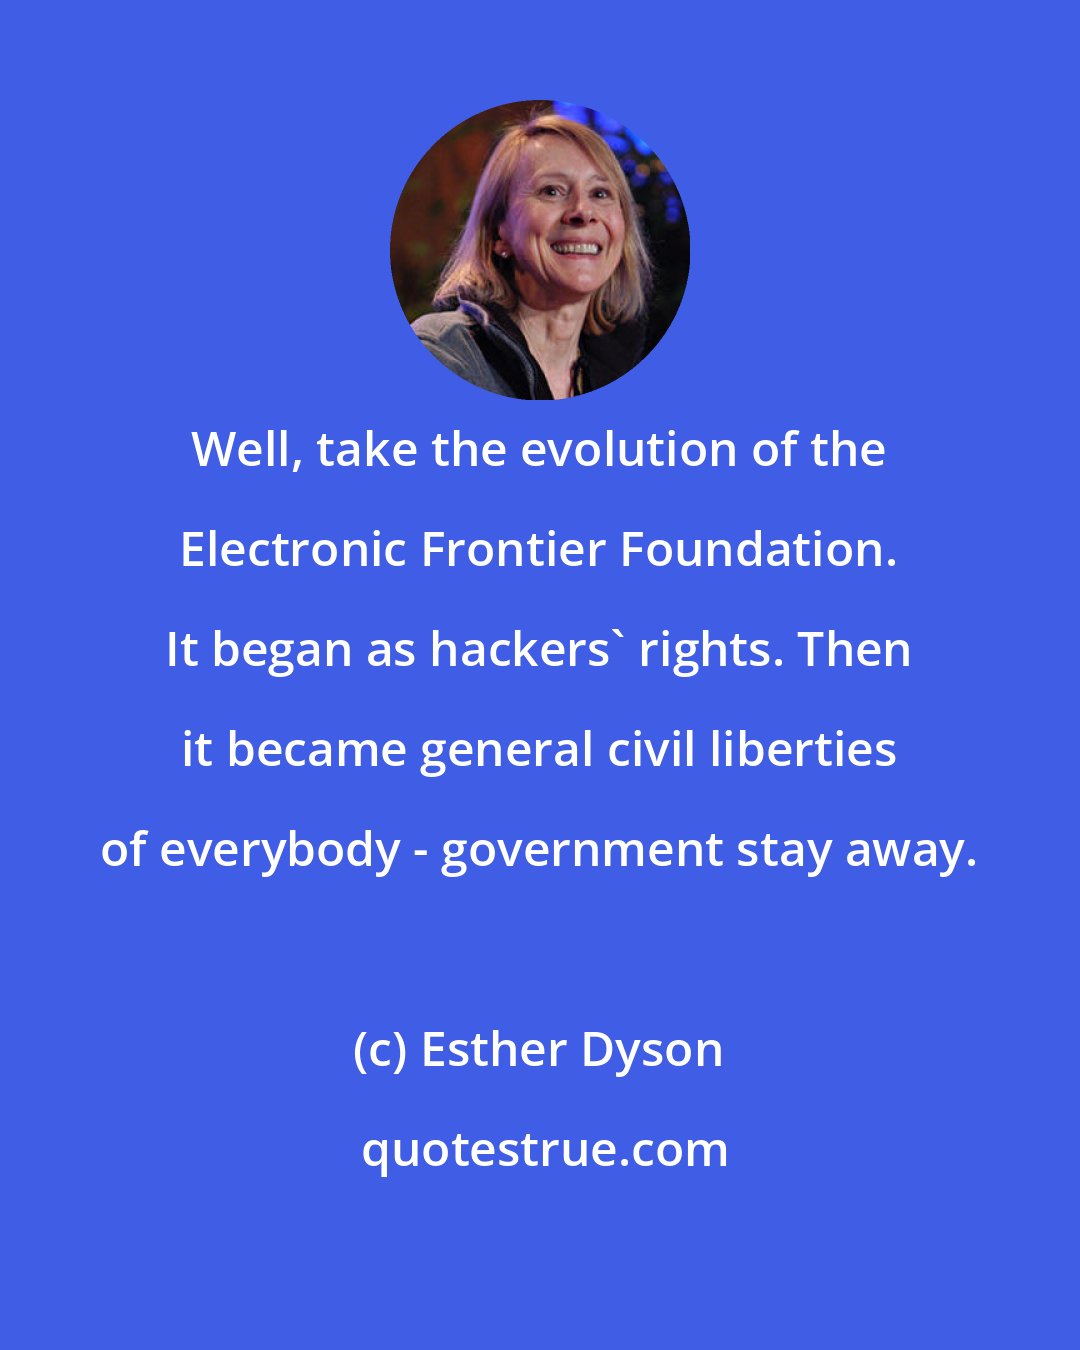 Esther Dyson: Well, take the evolution of the Electronic Frontier Foundation. It began as hackers' rights. Then it became general civil liberties of everybody - government stay away.